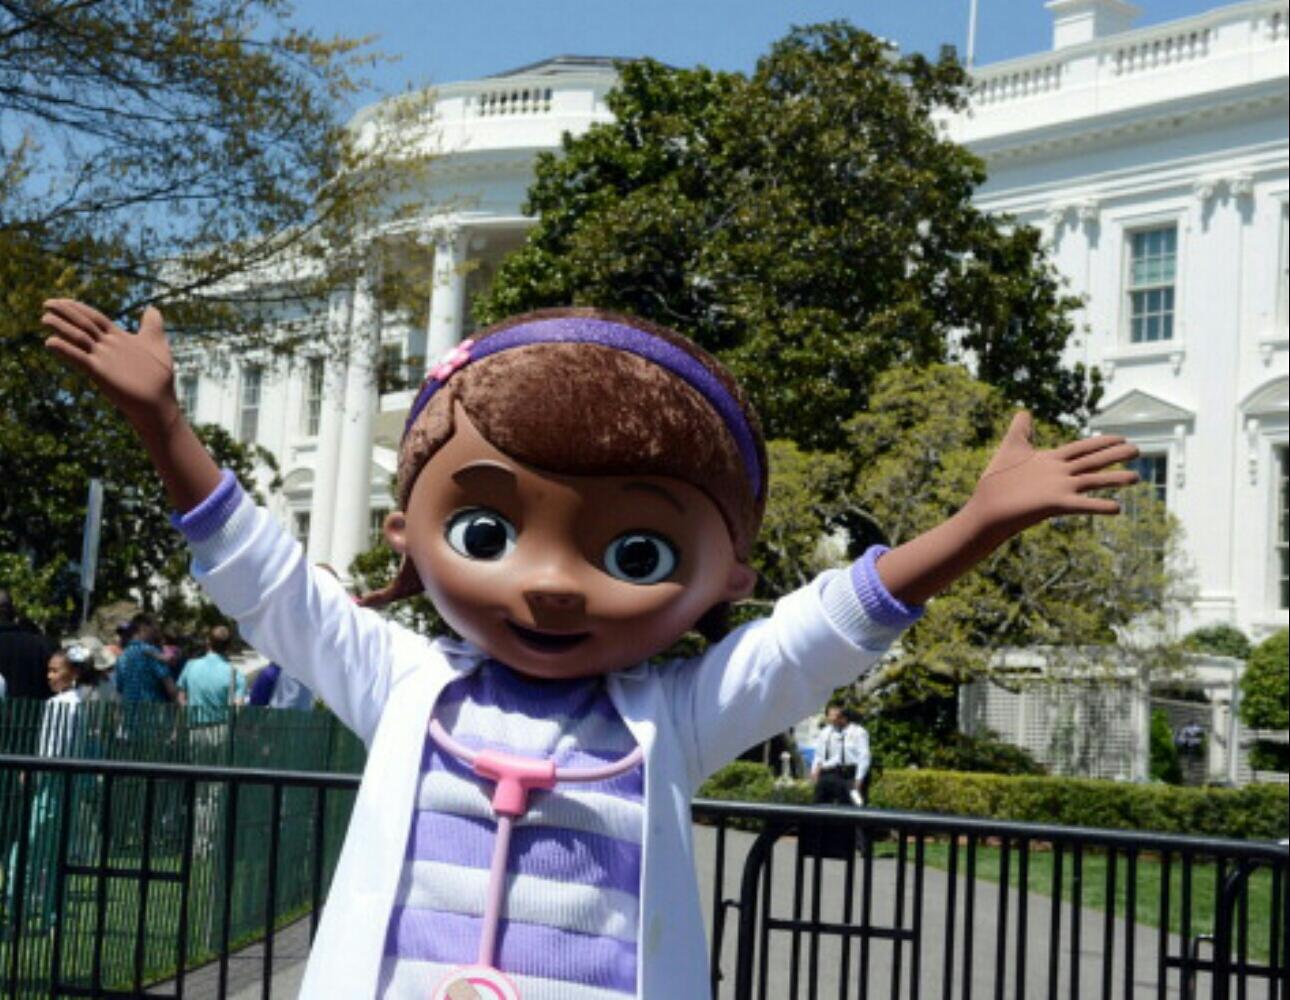 The Doc is in the House! Doc McStuffins visits The White House on Veterans Day 2014.